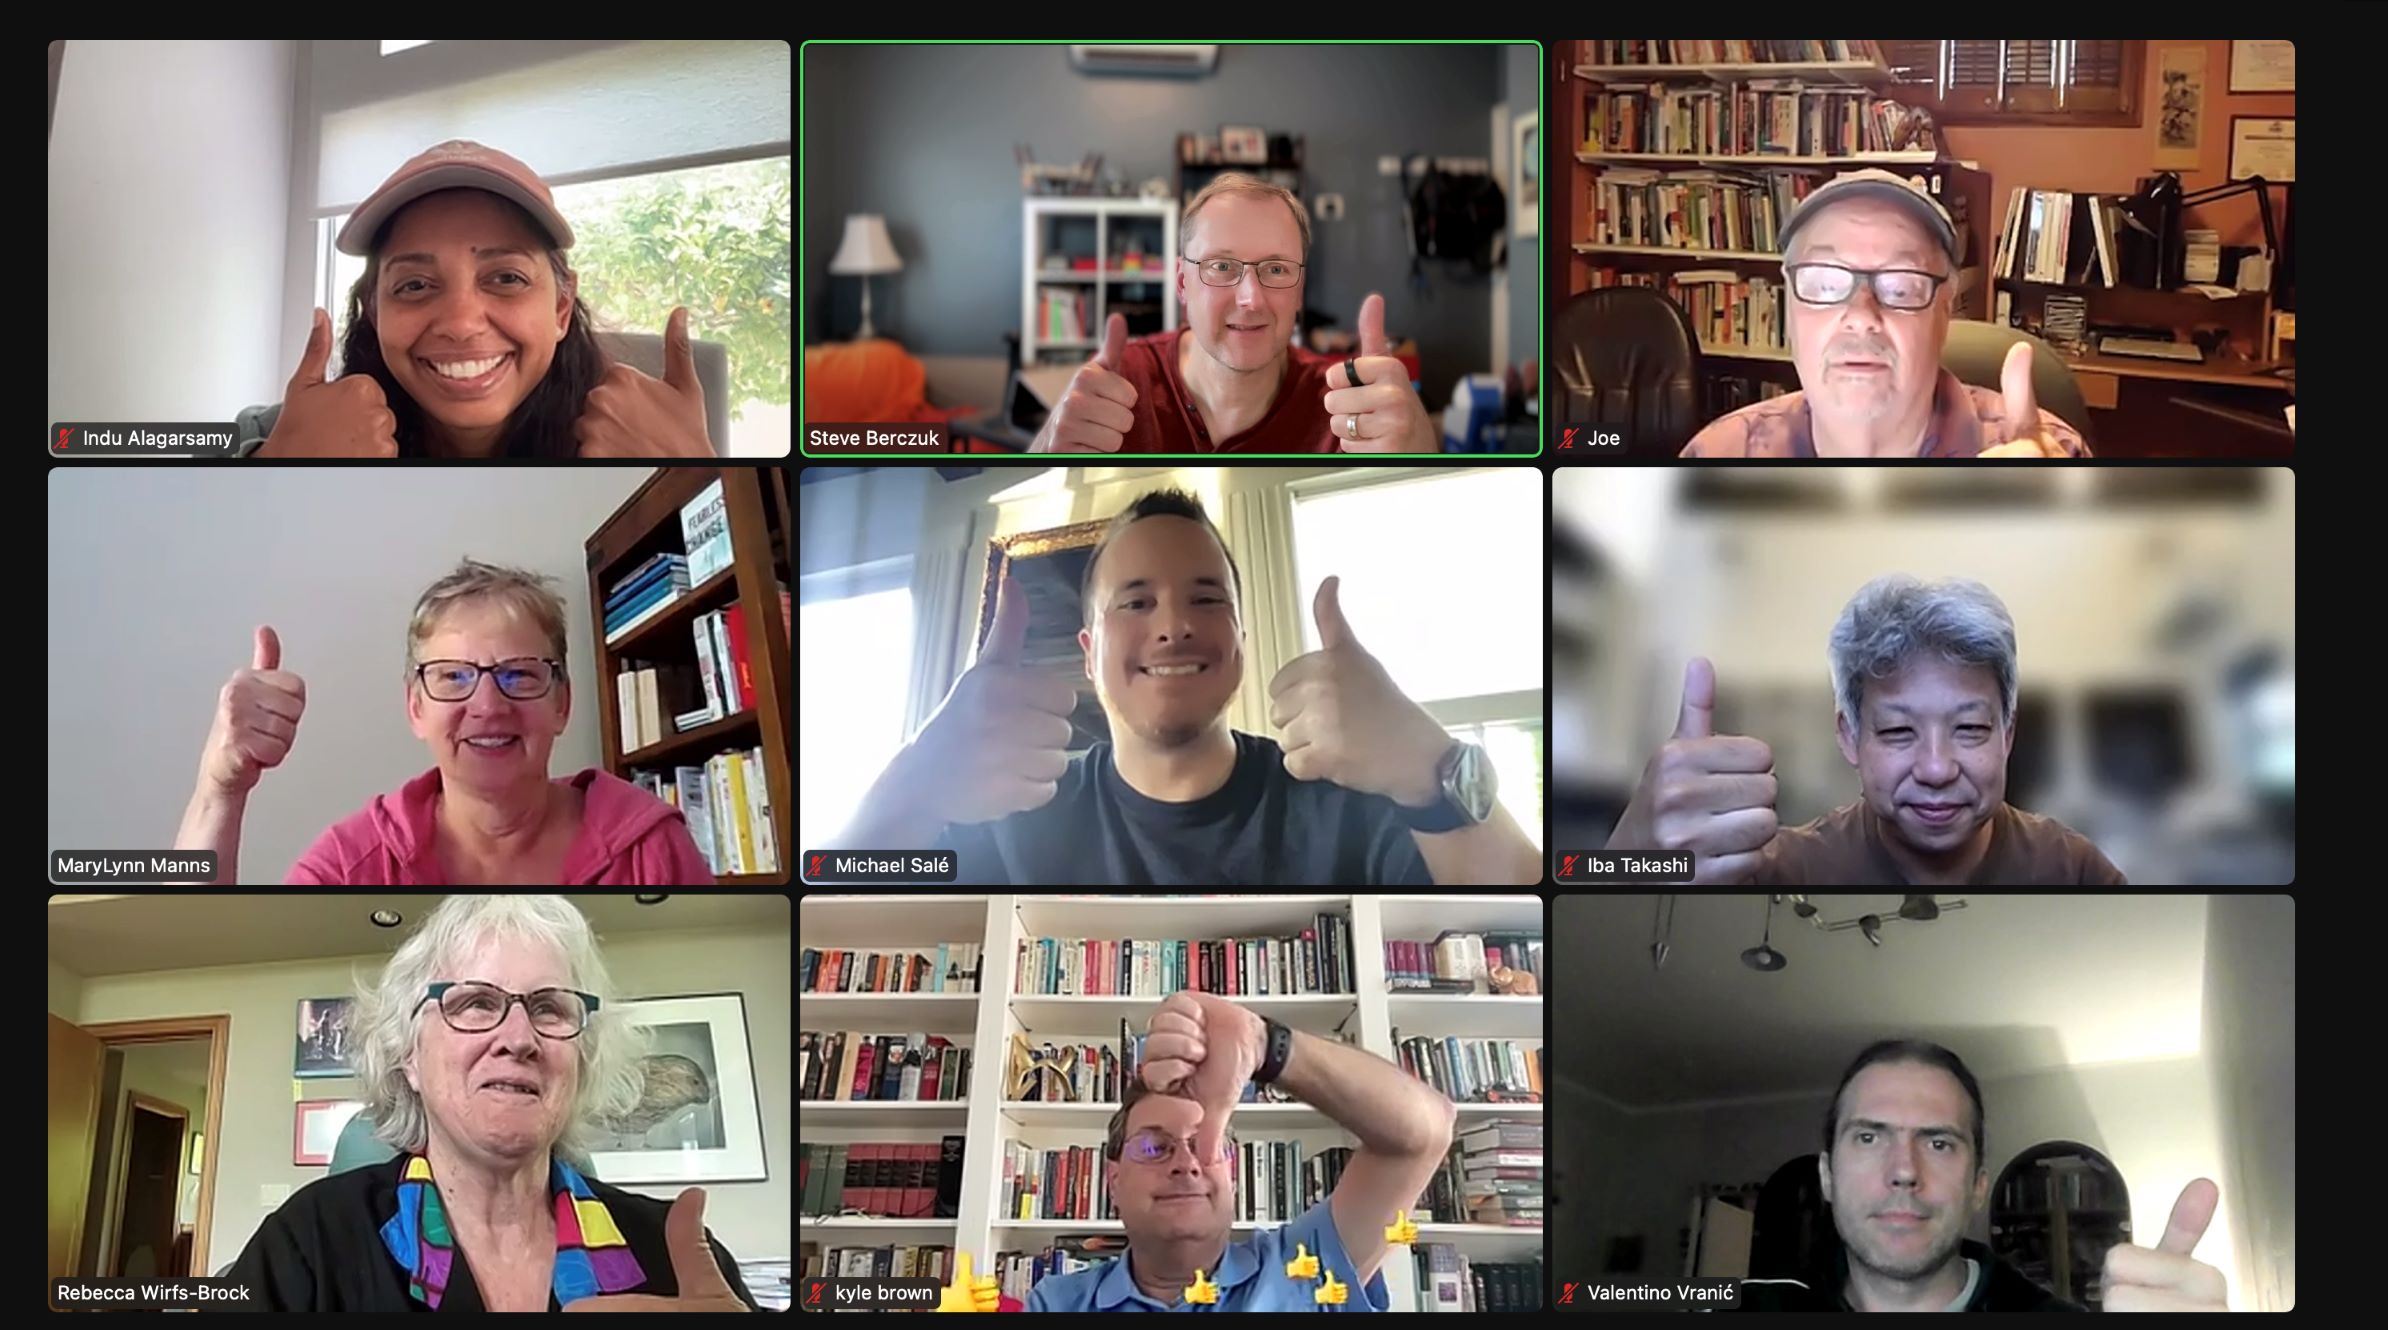 Screenshot of 9 people on Zoom call giving thumbs up or thumbs down hand signals